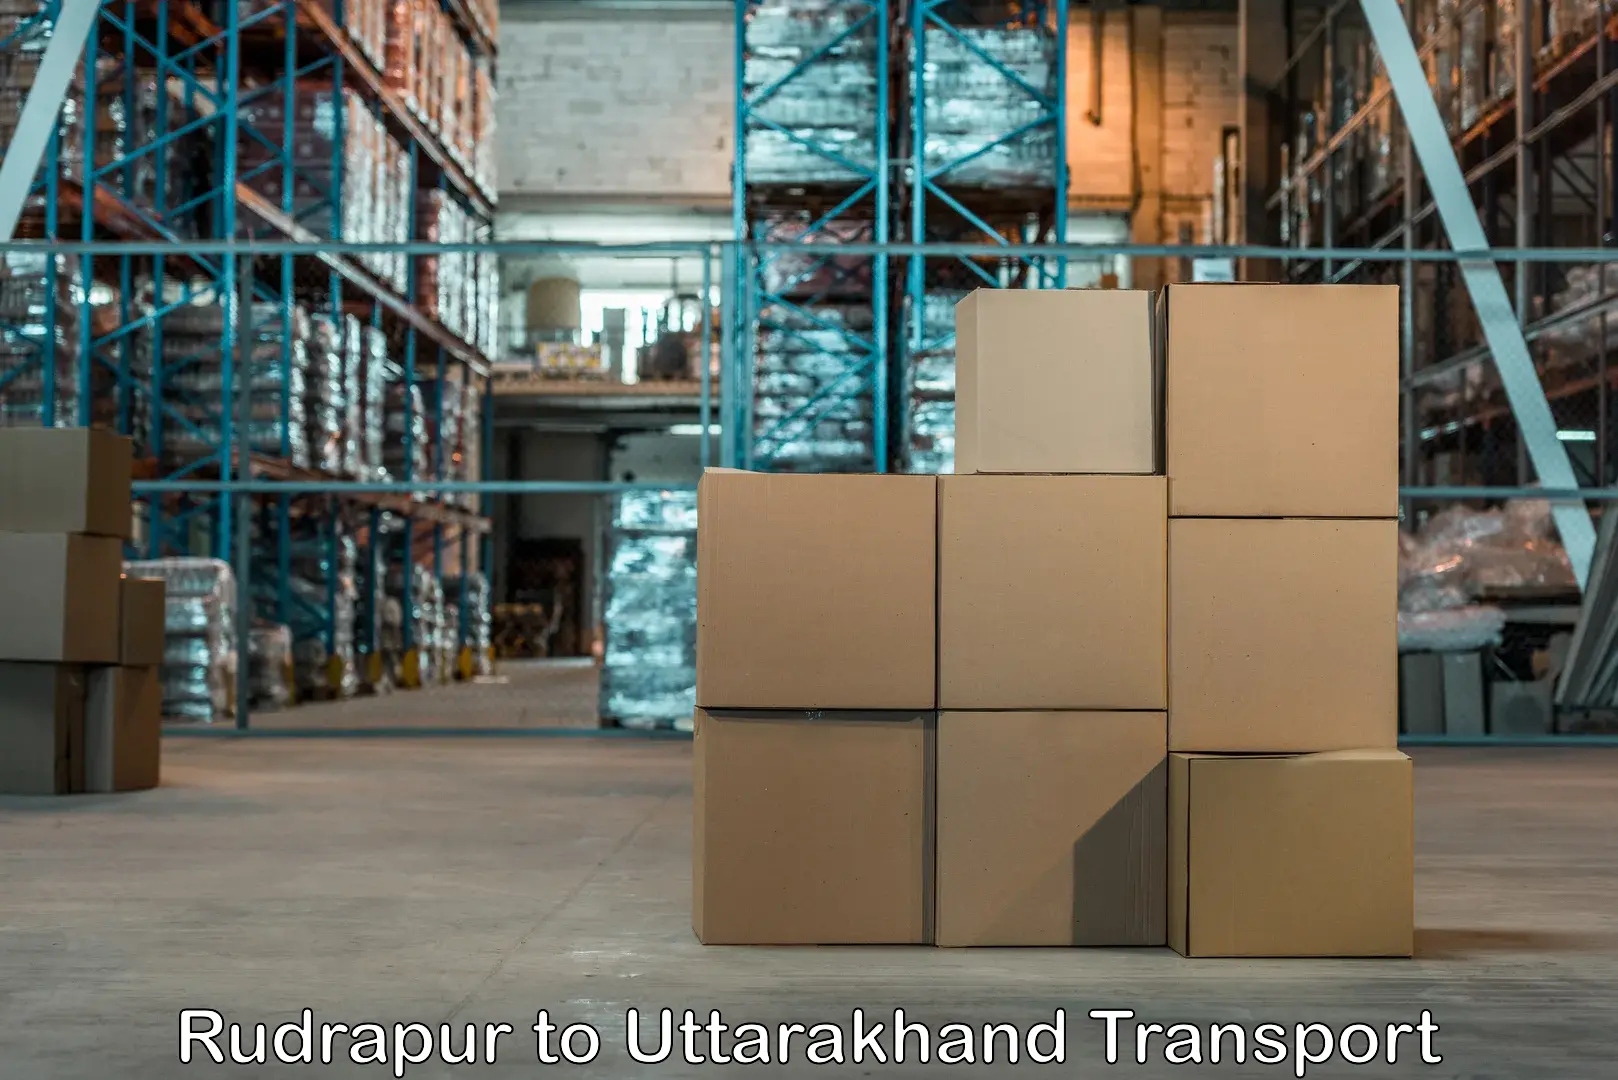 Land transport services in Rudrapur to Chamoli